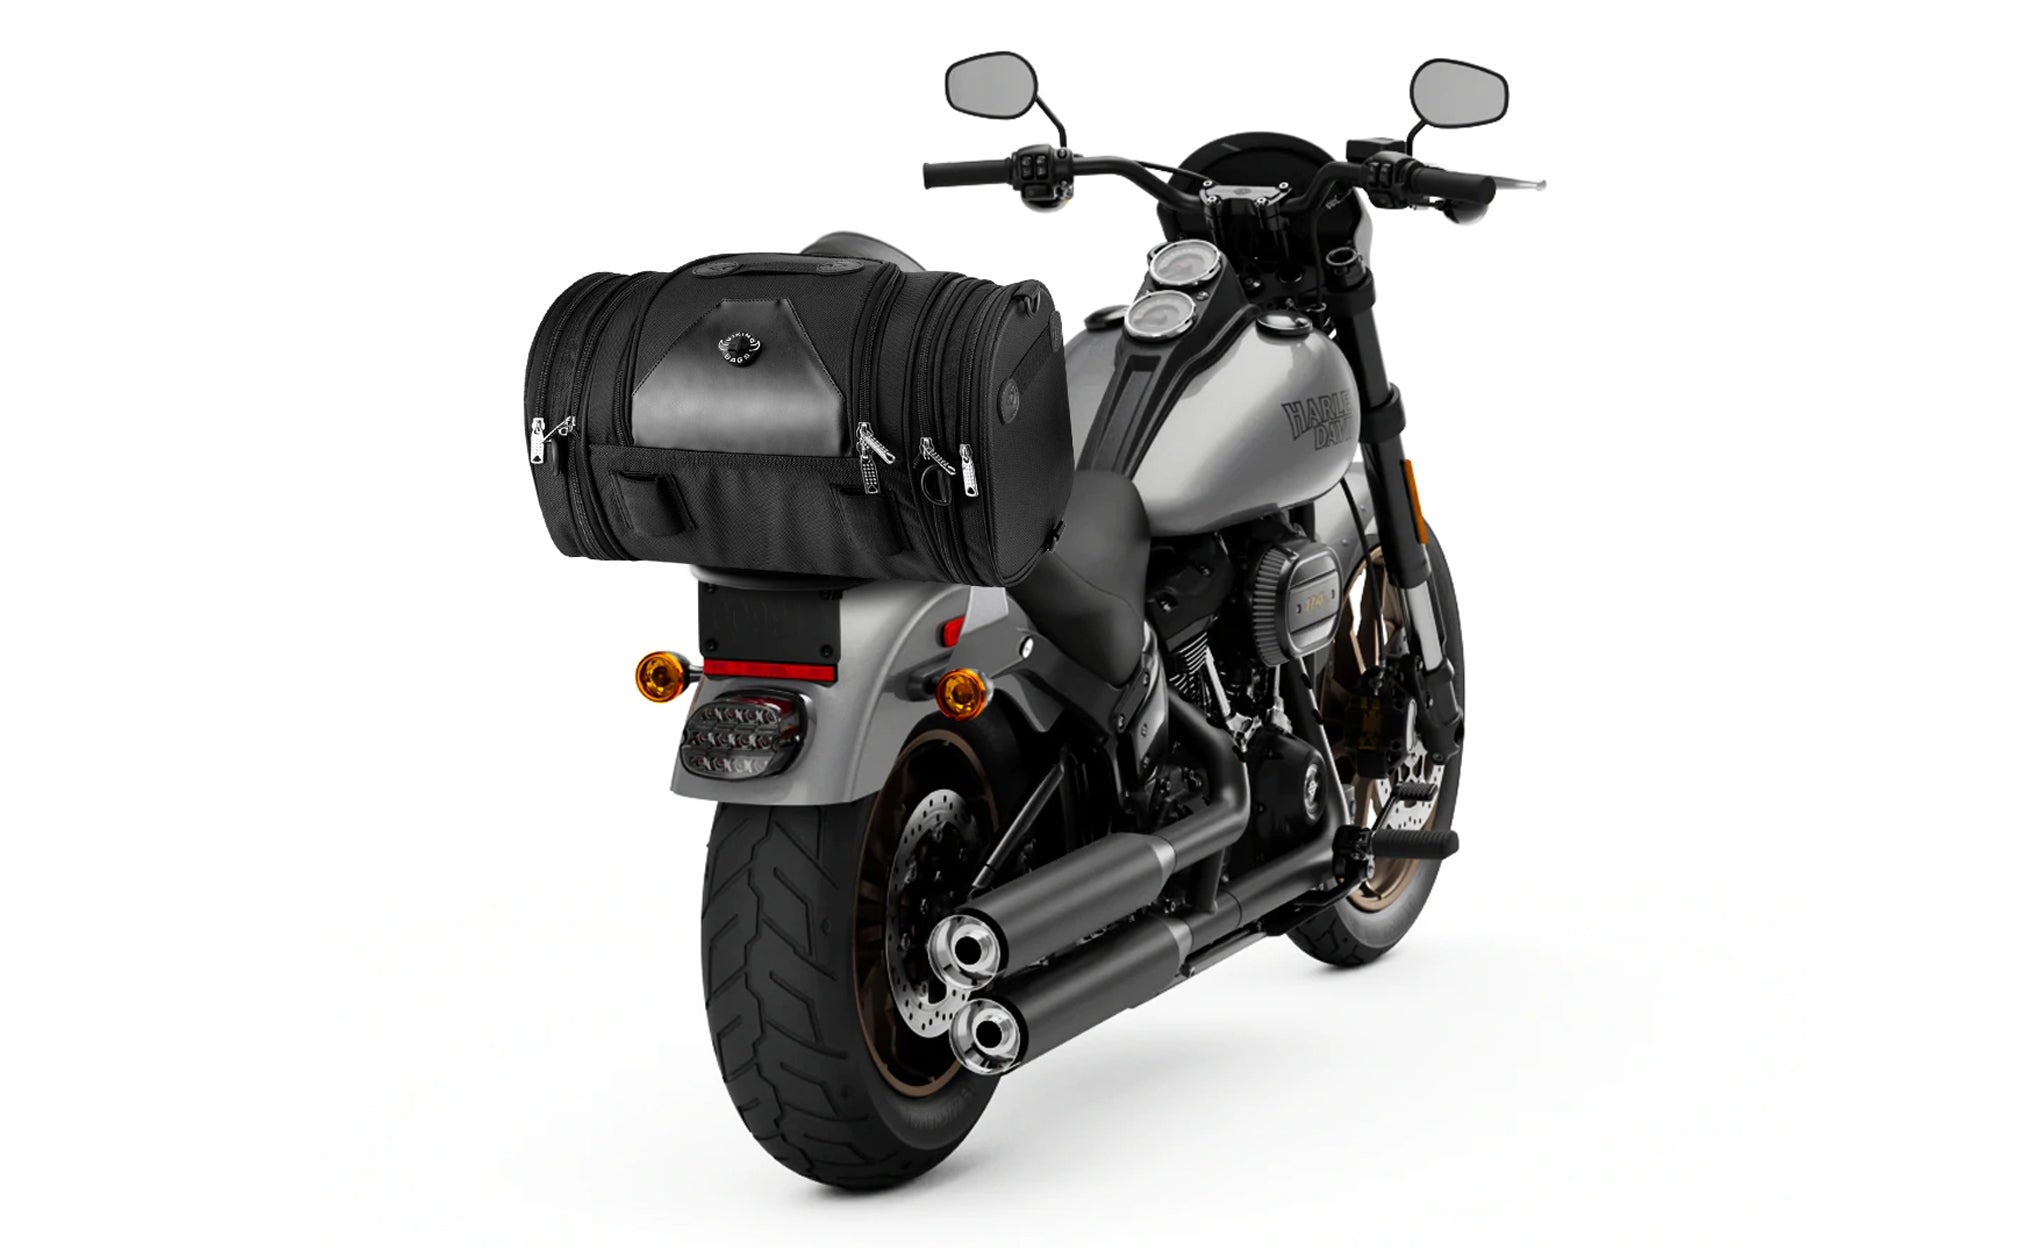 Viking Axwell Small Motorcycle Tail Bag Bag on Bike View @expand